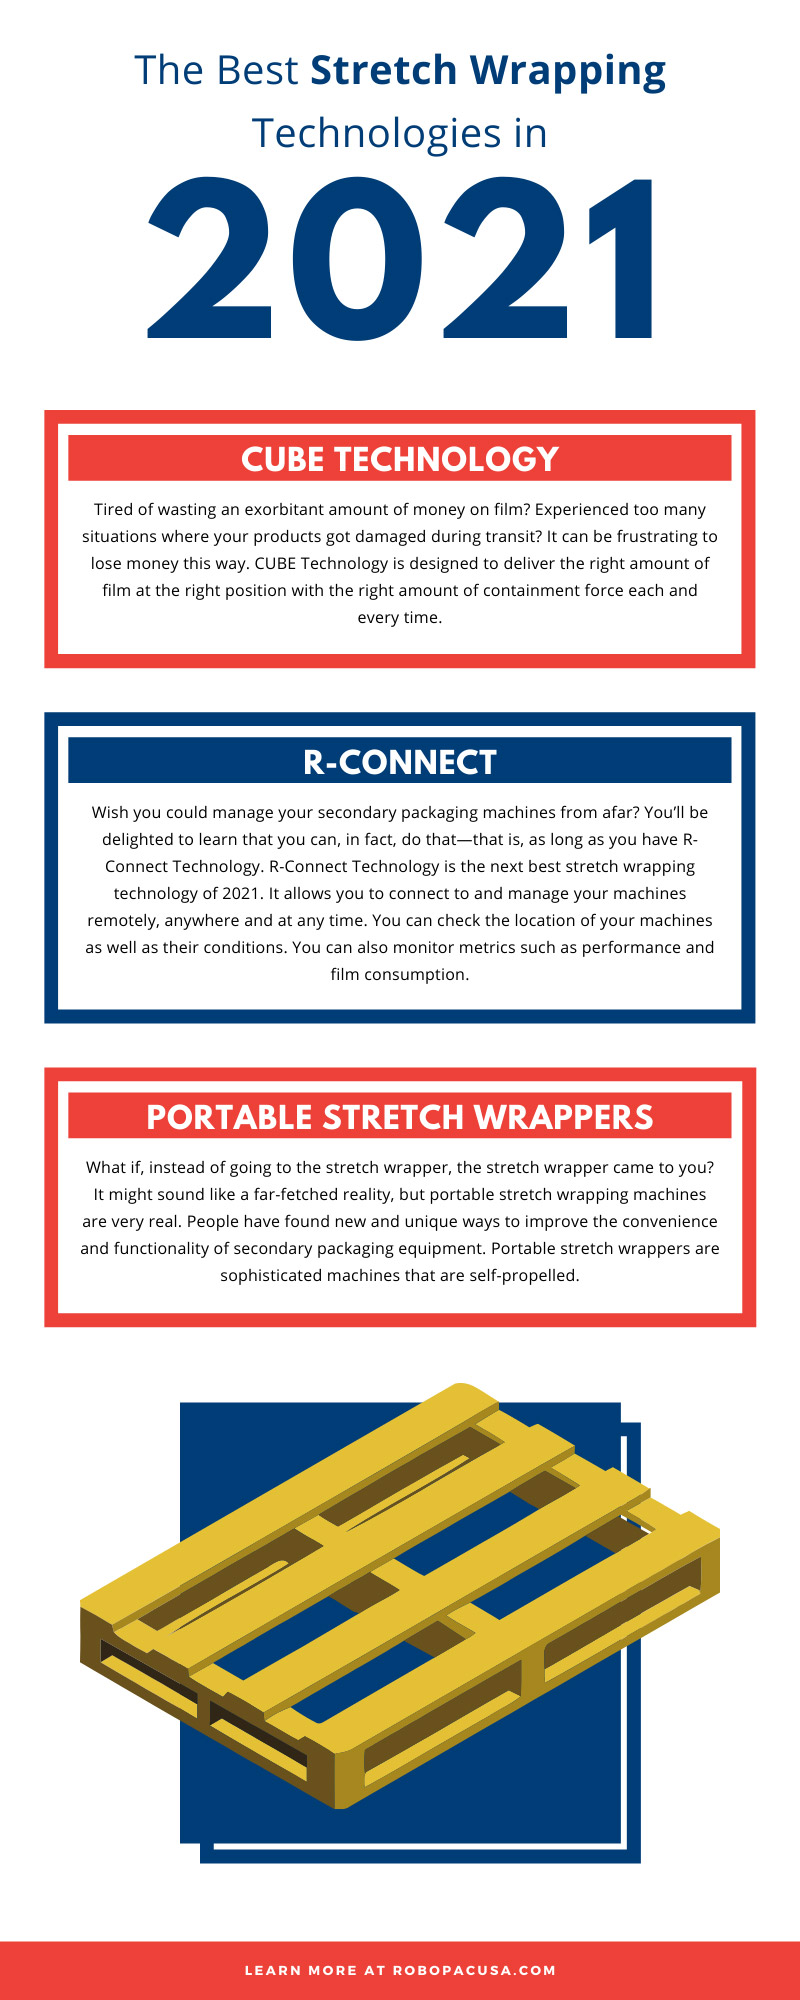 The Best Stretch Wrapping Technologies in 2021